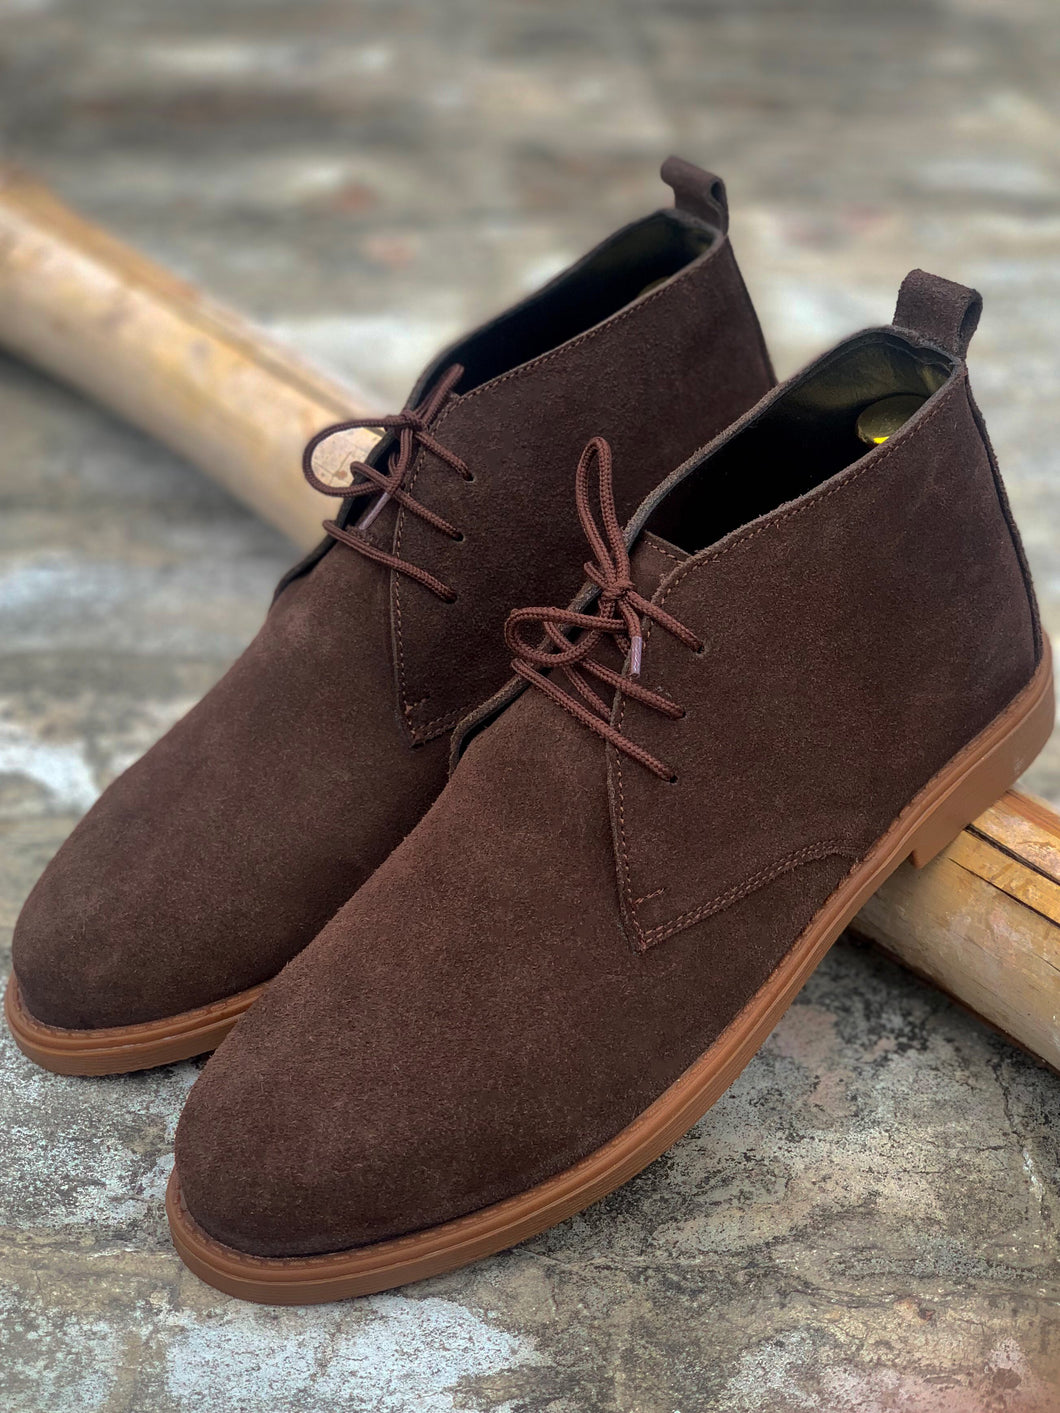 Brown Suede Leather Chukka Boots